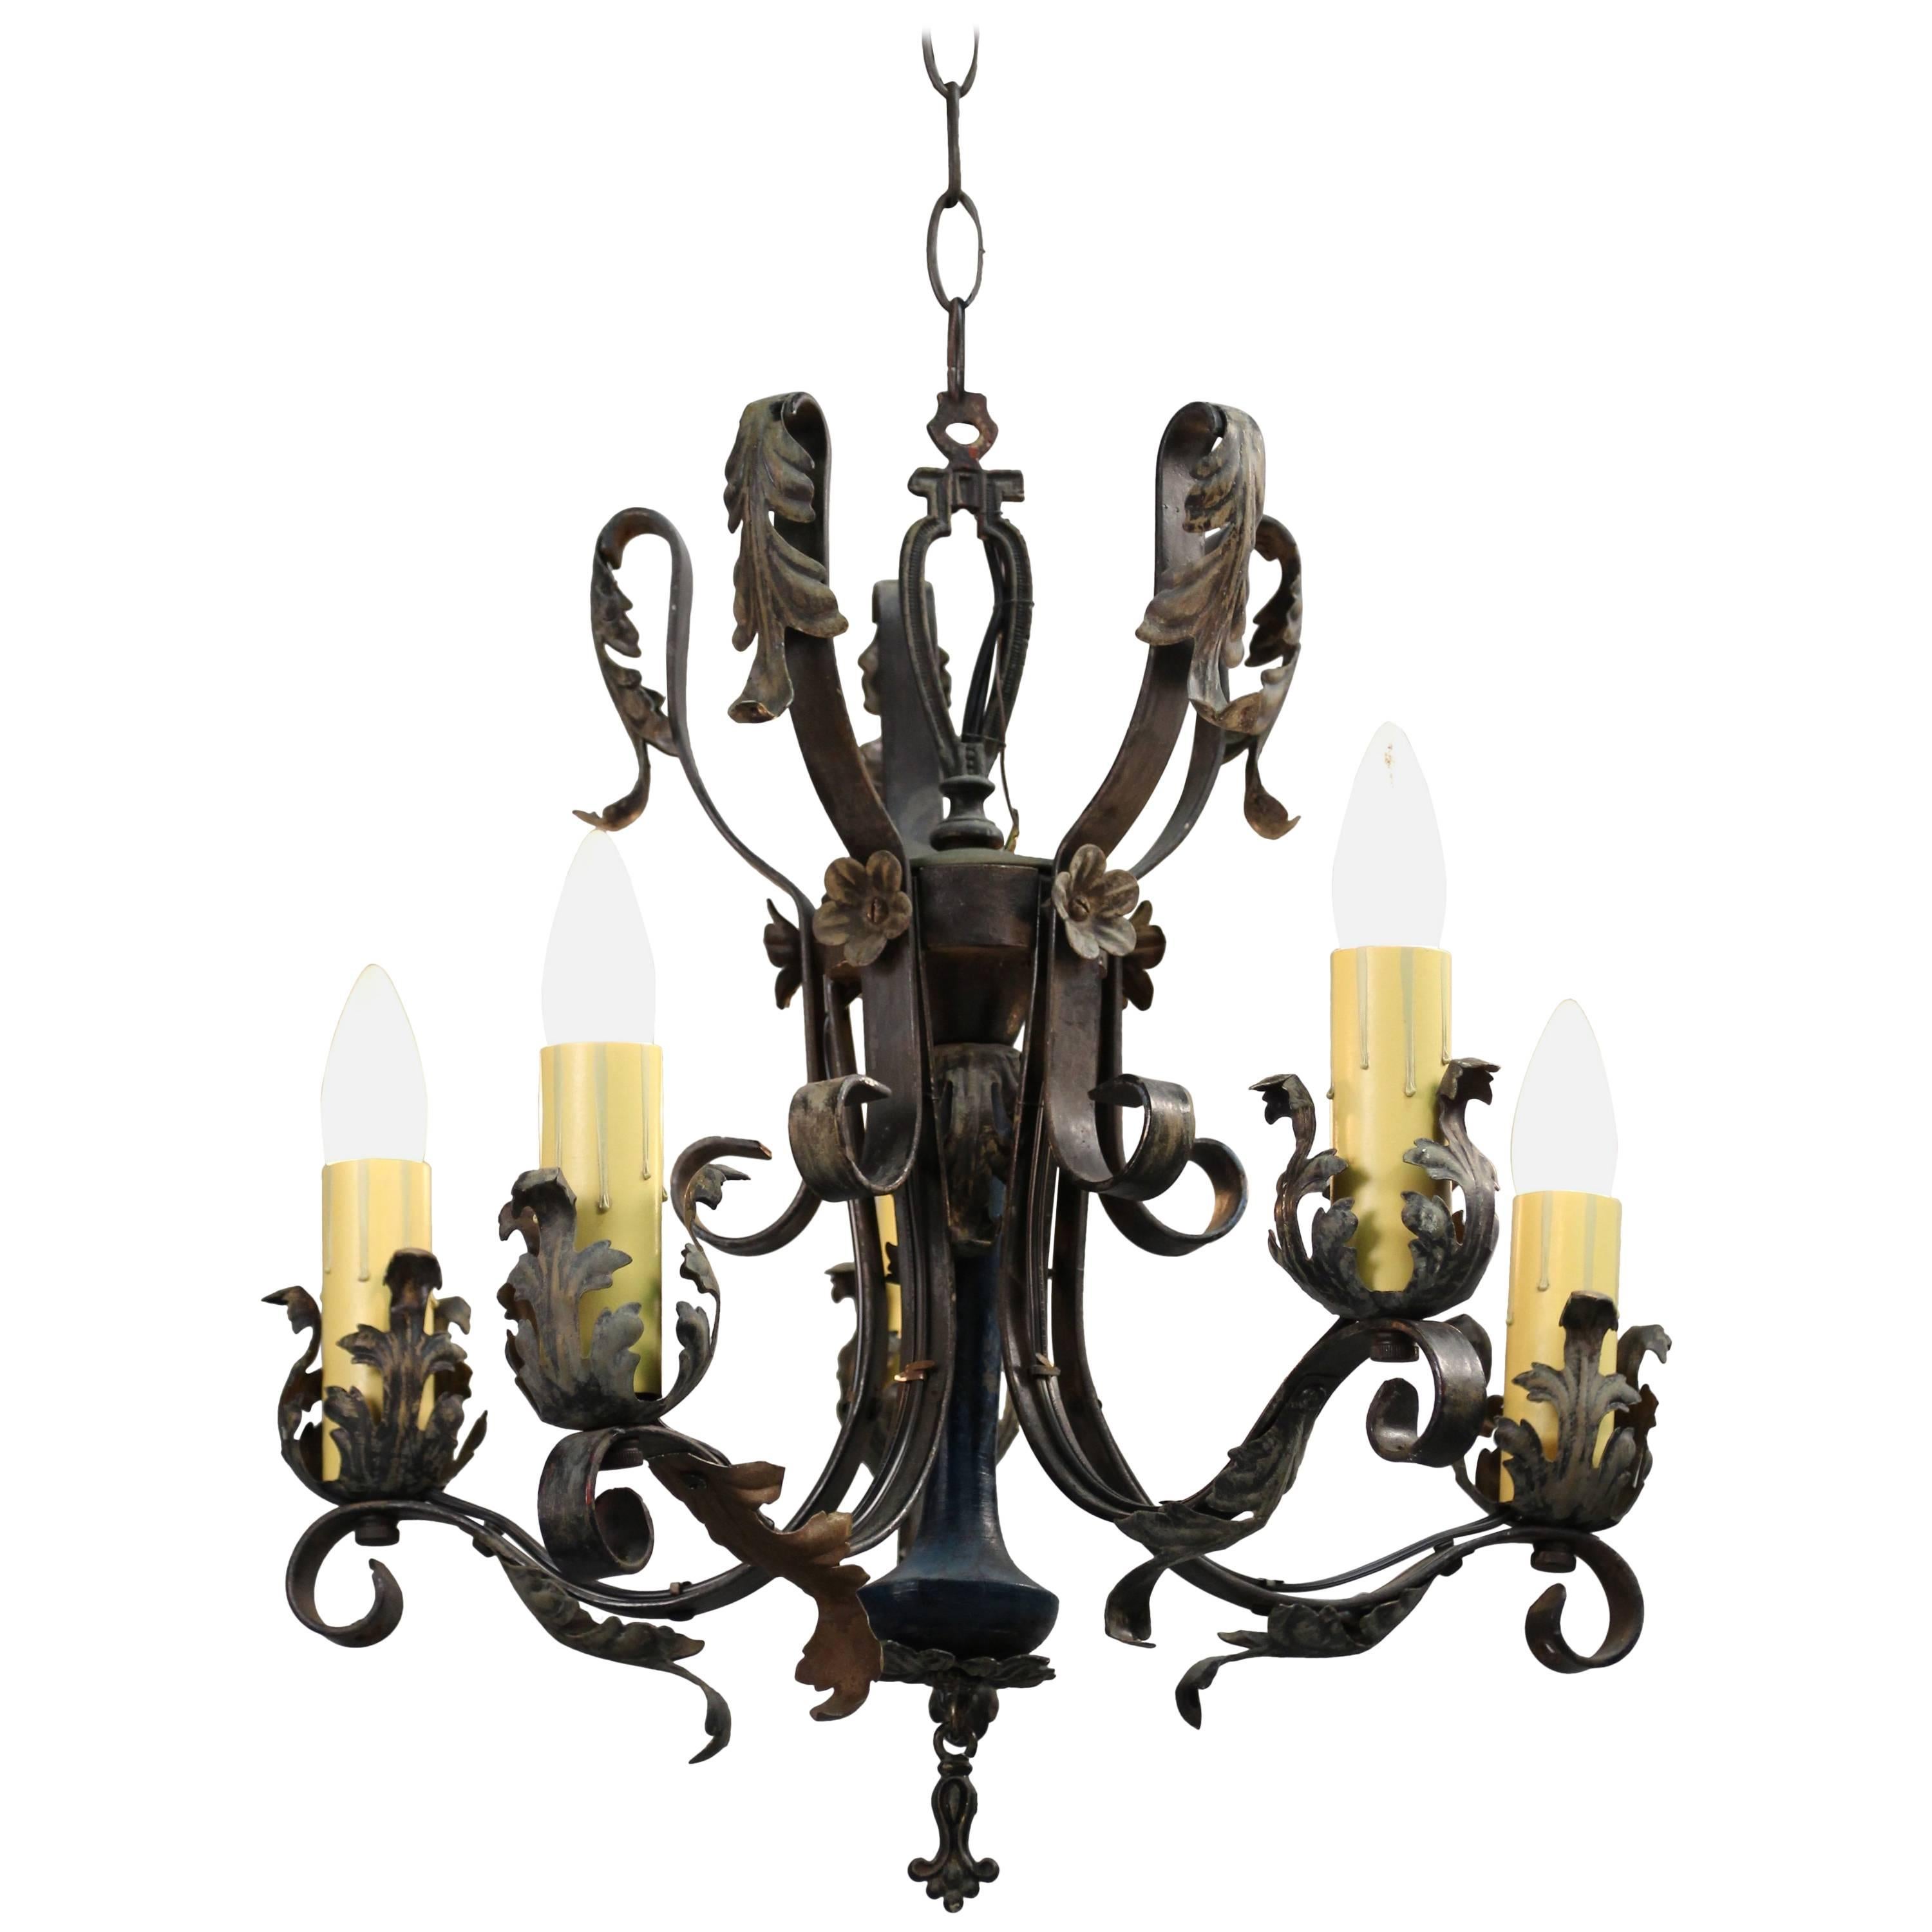 Spanish Revival Chandelier with Acanthus Leaf Motif